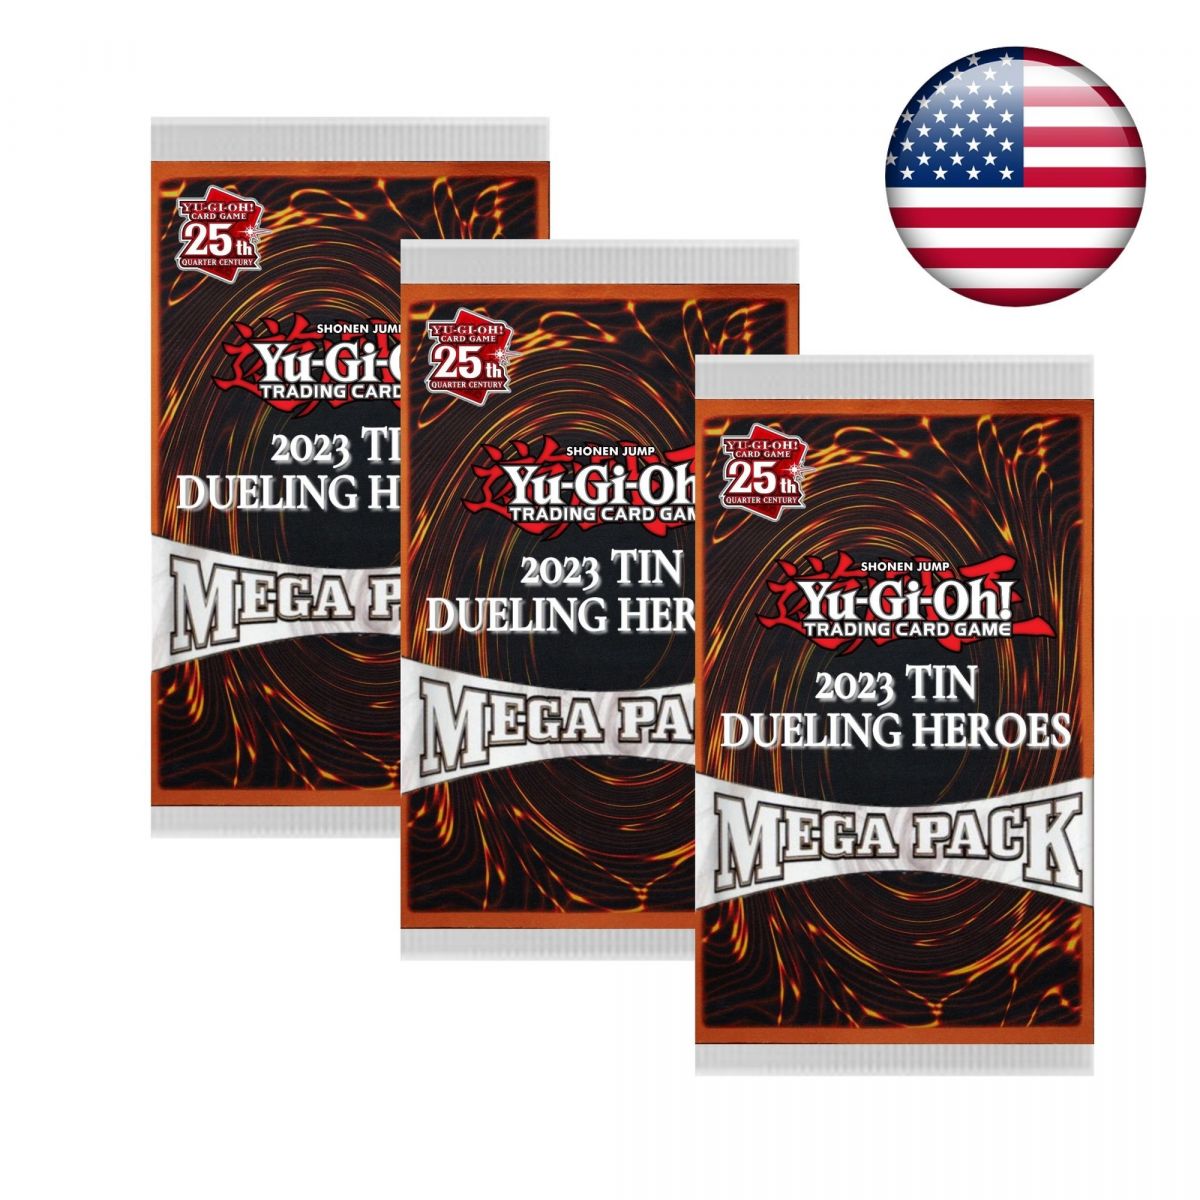 Yu Gi Oh! - Lot of 3 Mega Pack Tin Box Boosters 25th Anniversary 2023 - Dueling Heroes - US